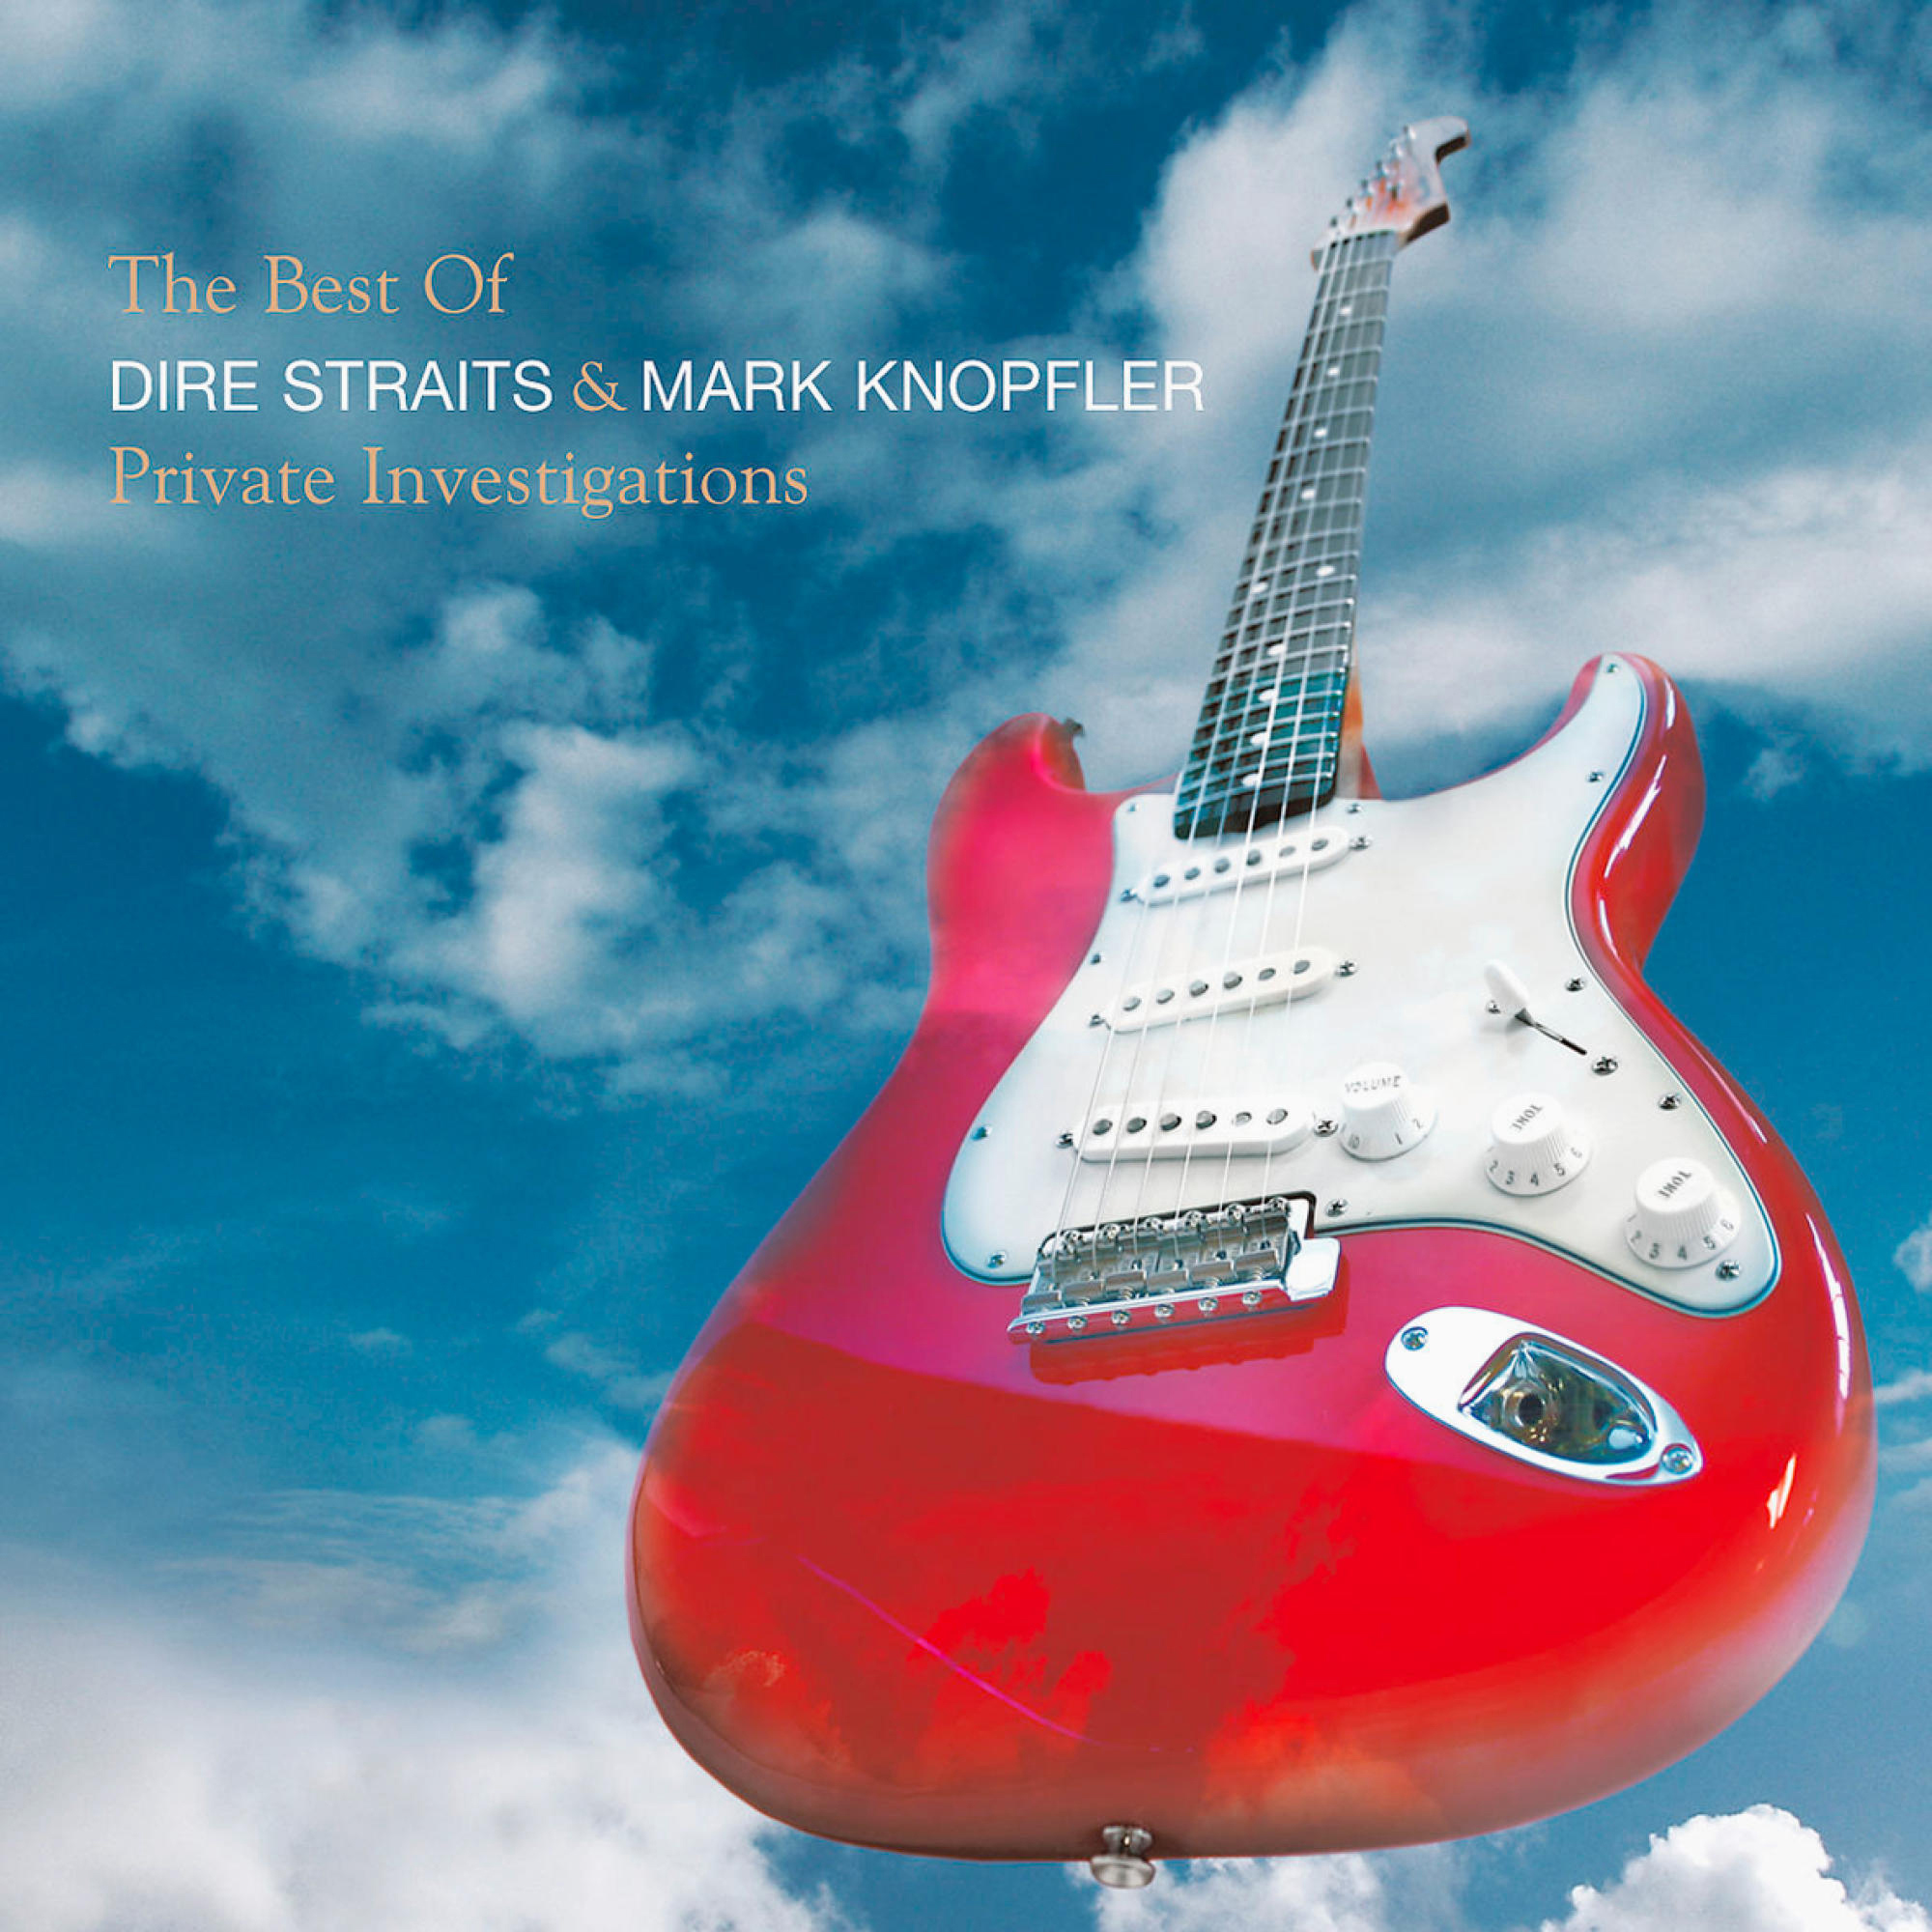 Mark (CD) Knopfler Dire - Best Investigations Of - Private - Straits,